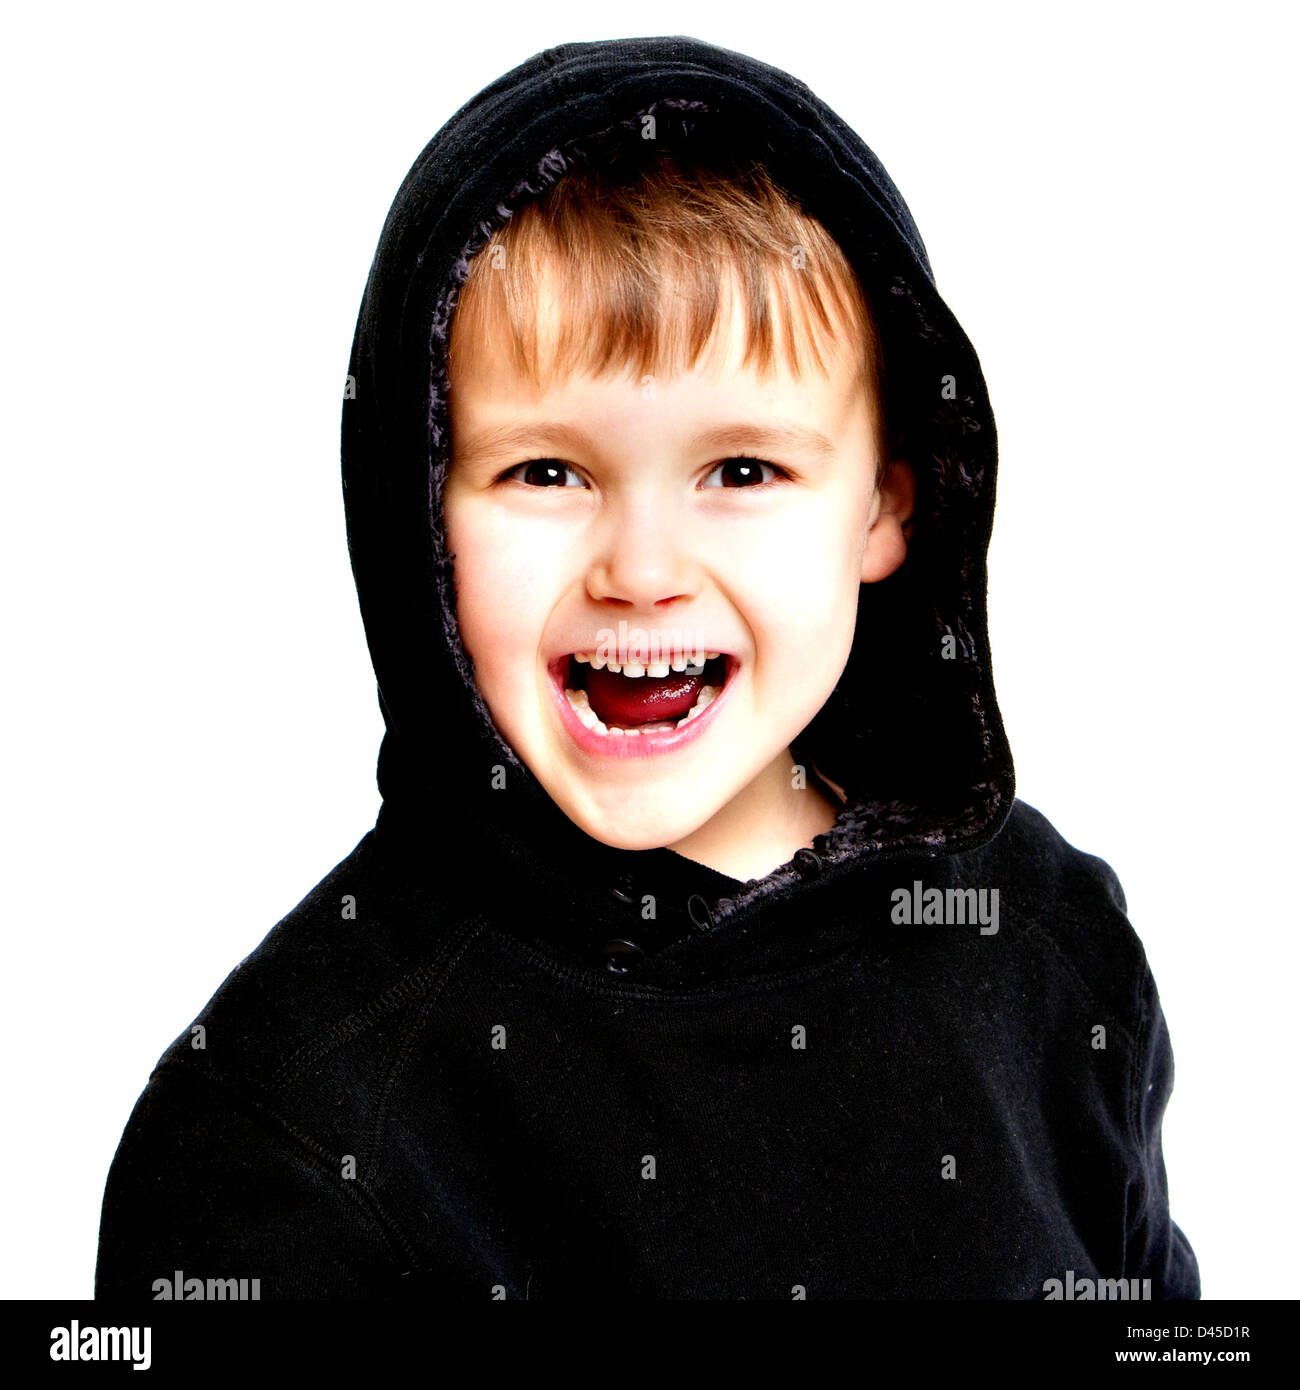 Five year old boy in a black hoodie sweatshirt with sallow skin brown hair and brown eyes against a white background. Stock Photo